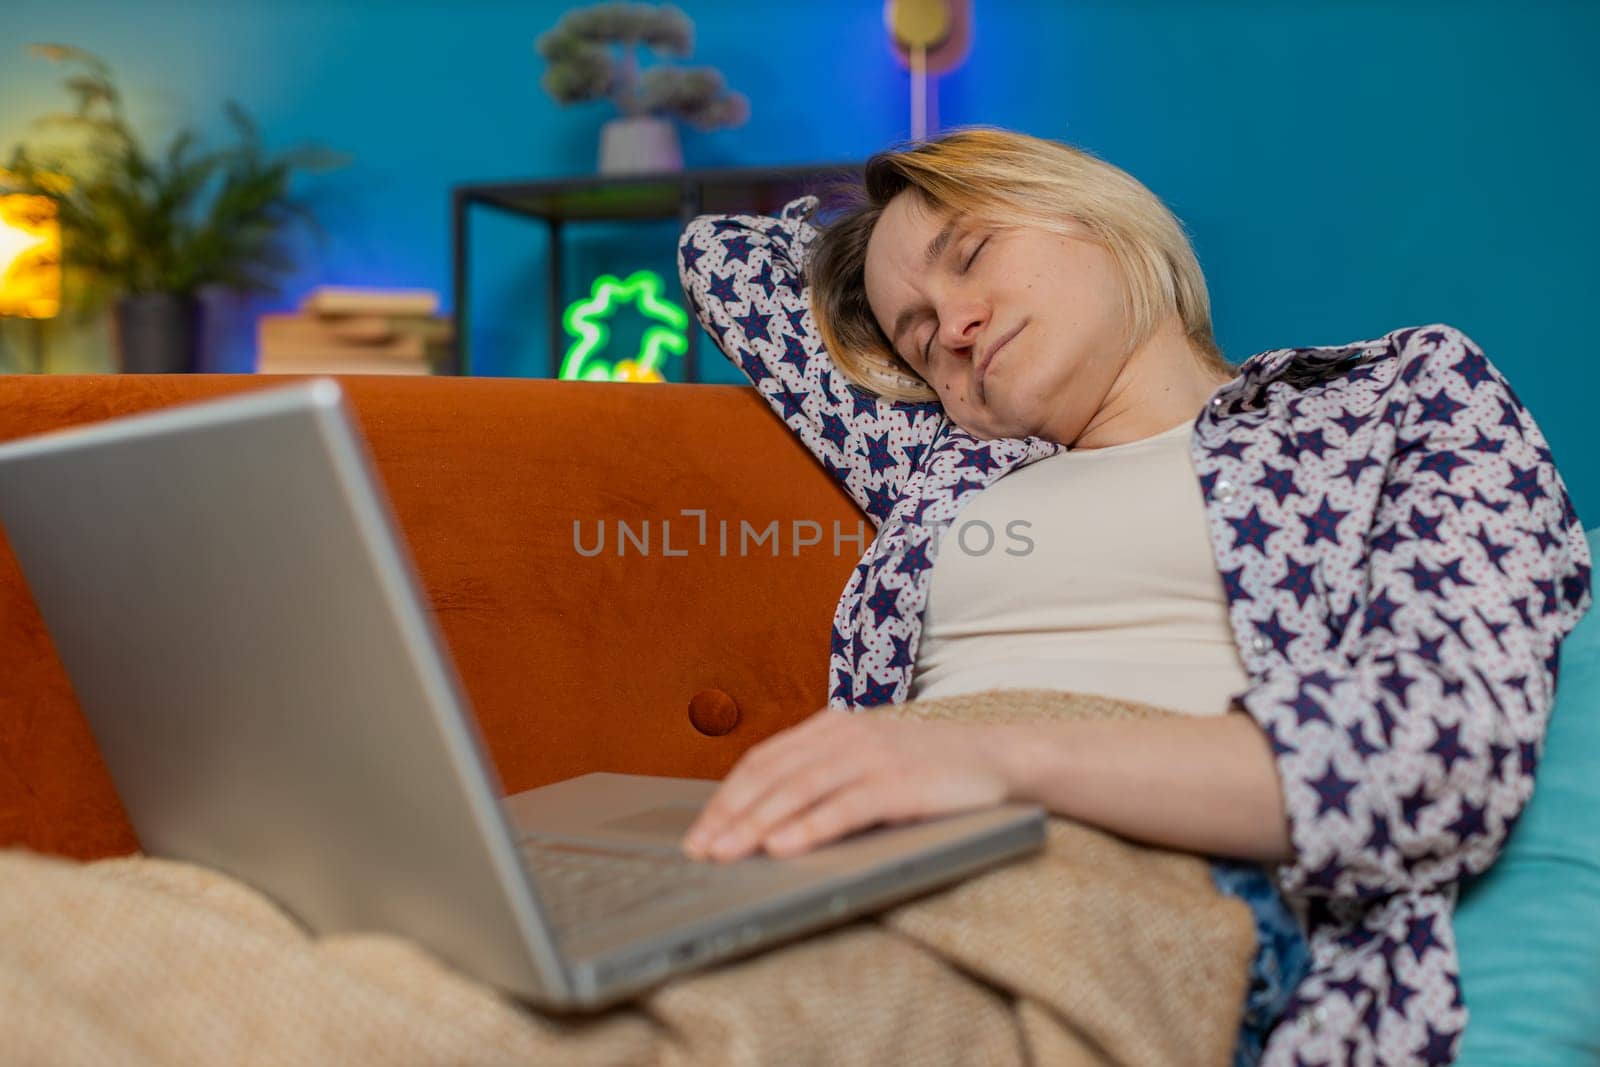 Bored sleepy young Caucasian woman working on laptop computer, leaning on hand sitting on couch with blanket. Exhausted tired freelancer workaholic girl sleeping in living room at home apartments